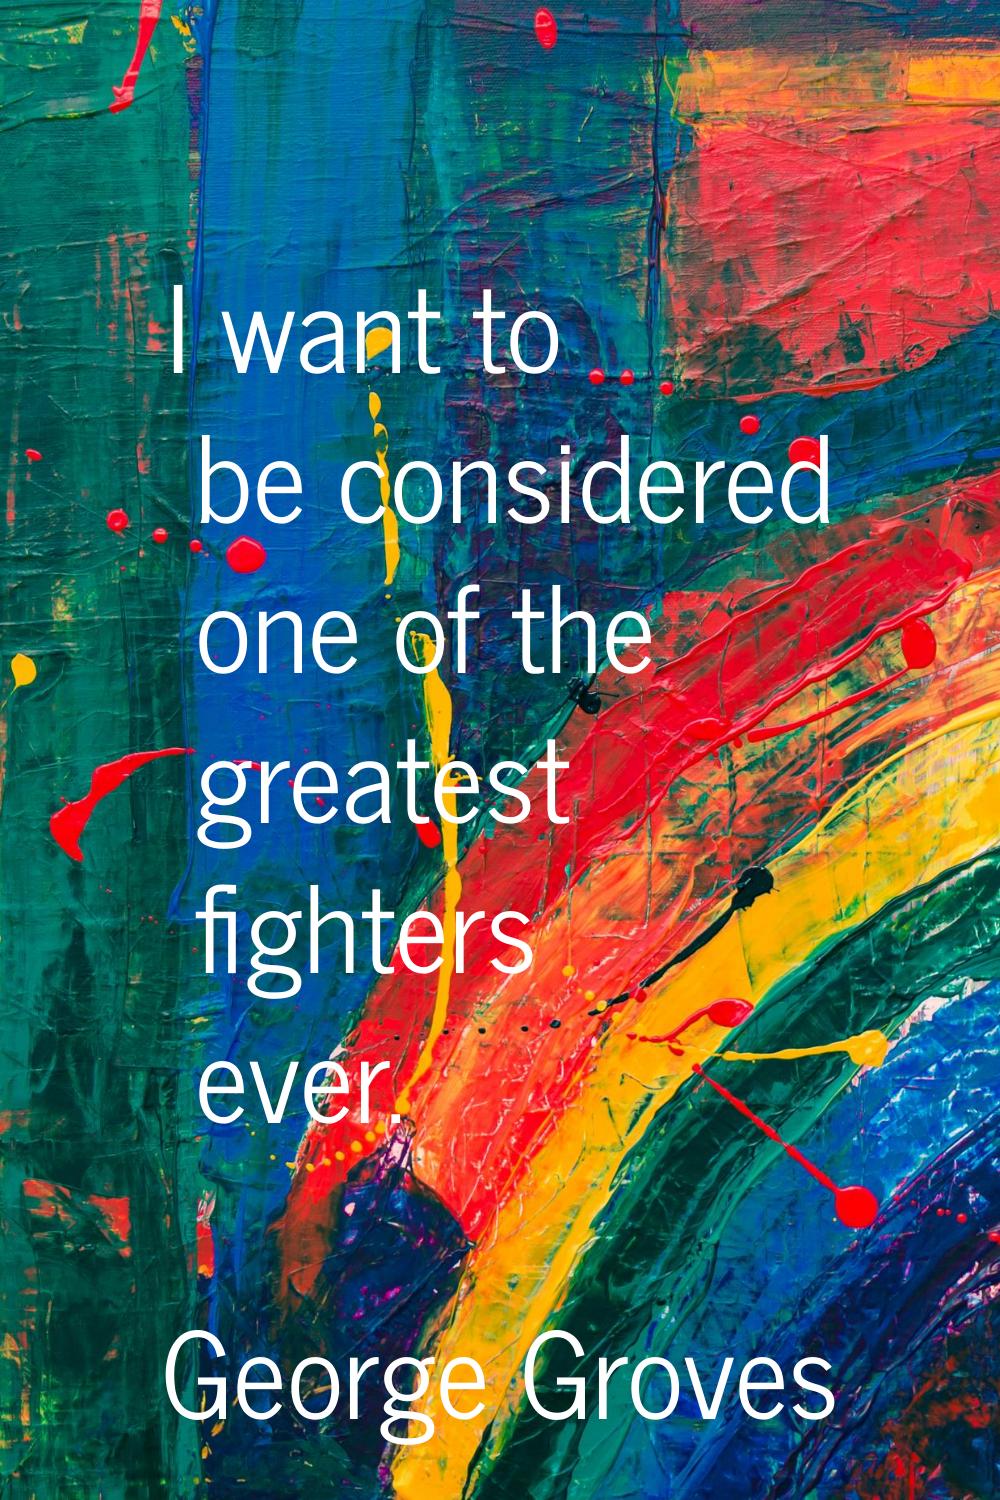 I want to be considered one of the greatest fighters ever.